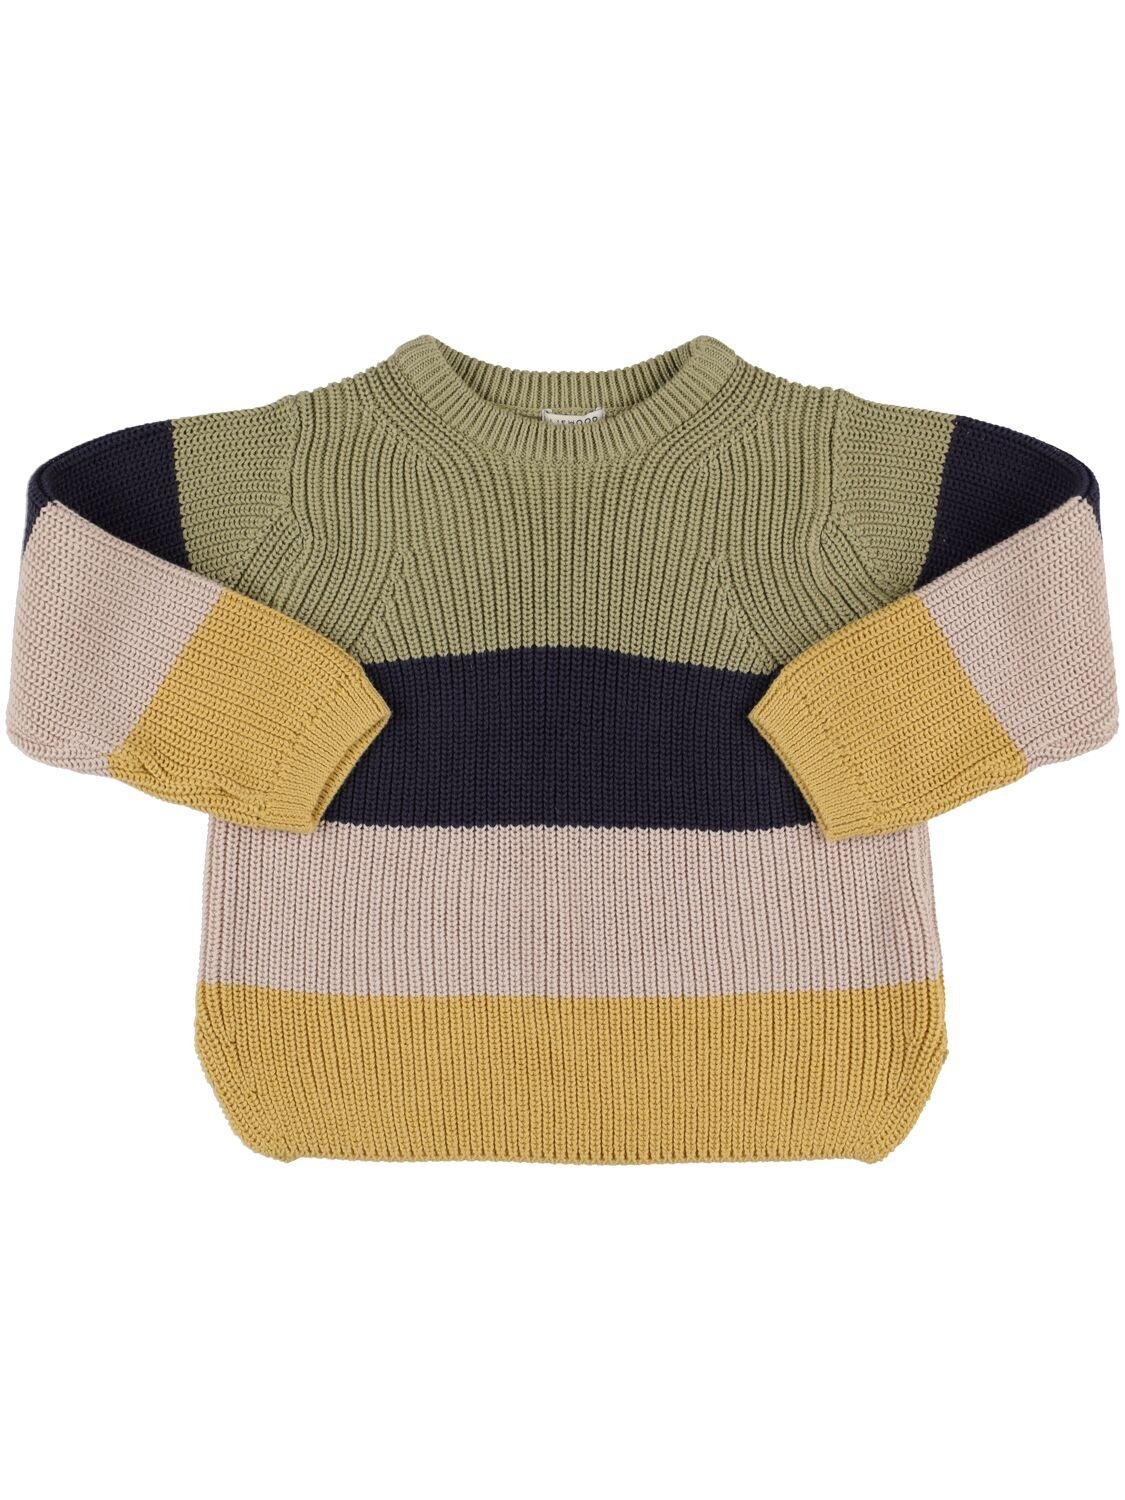 Cotton Knit Sweater by LIEWOOD